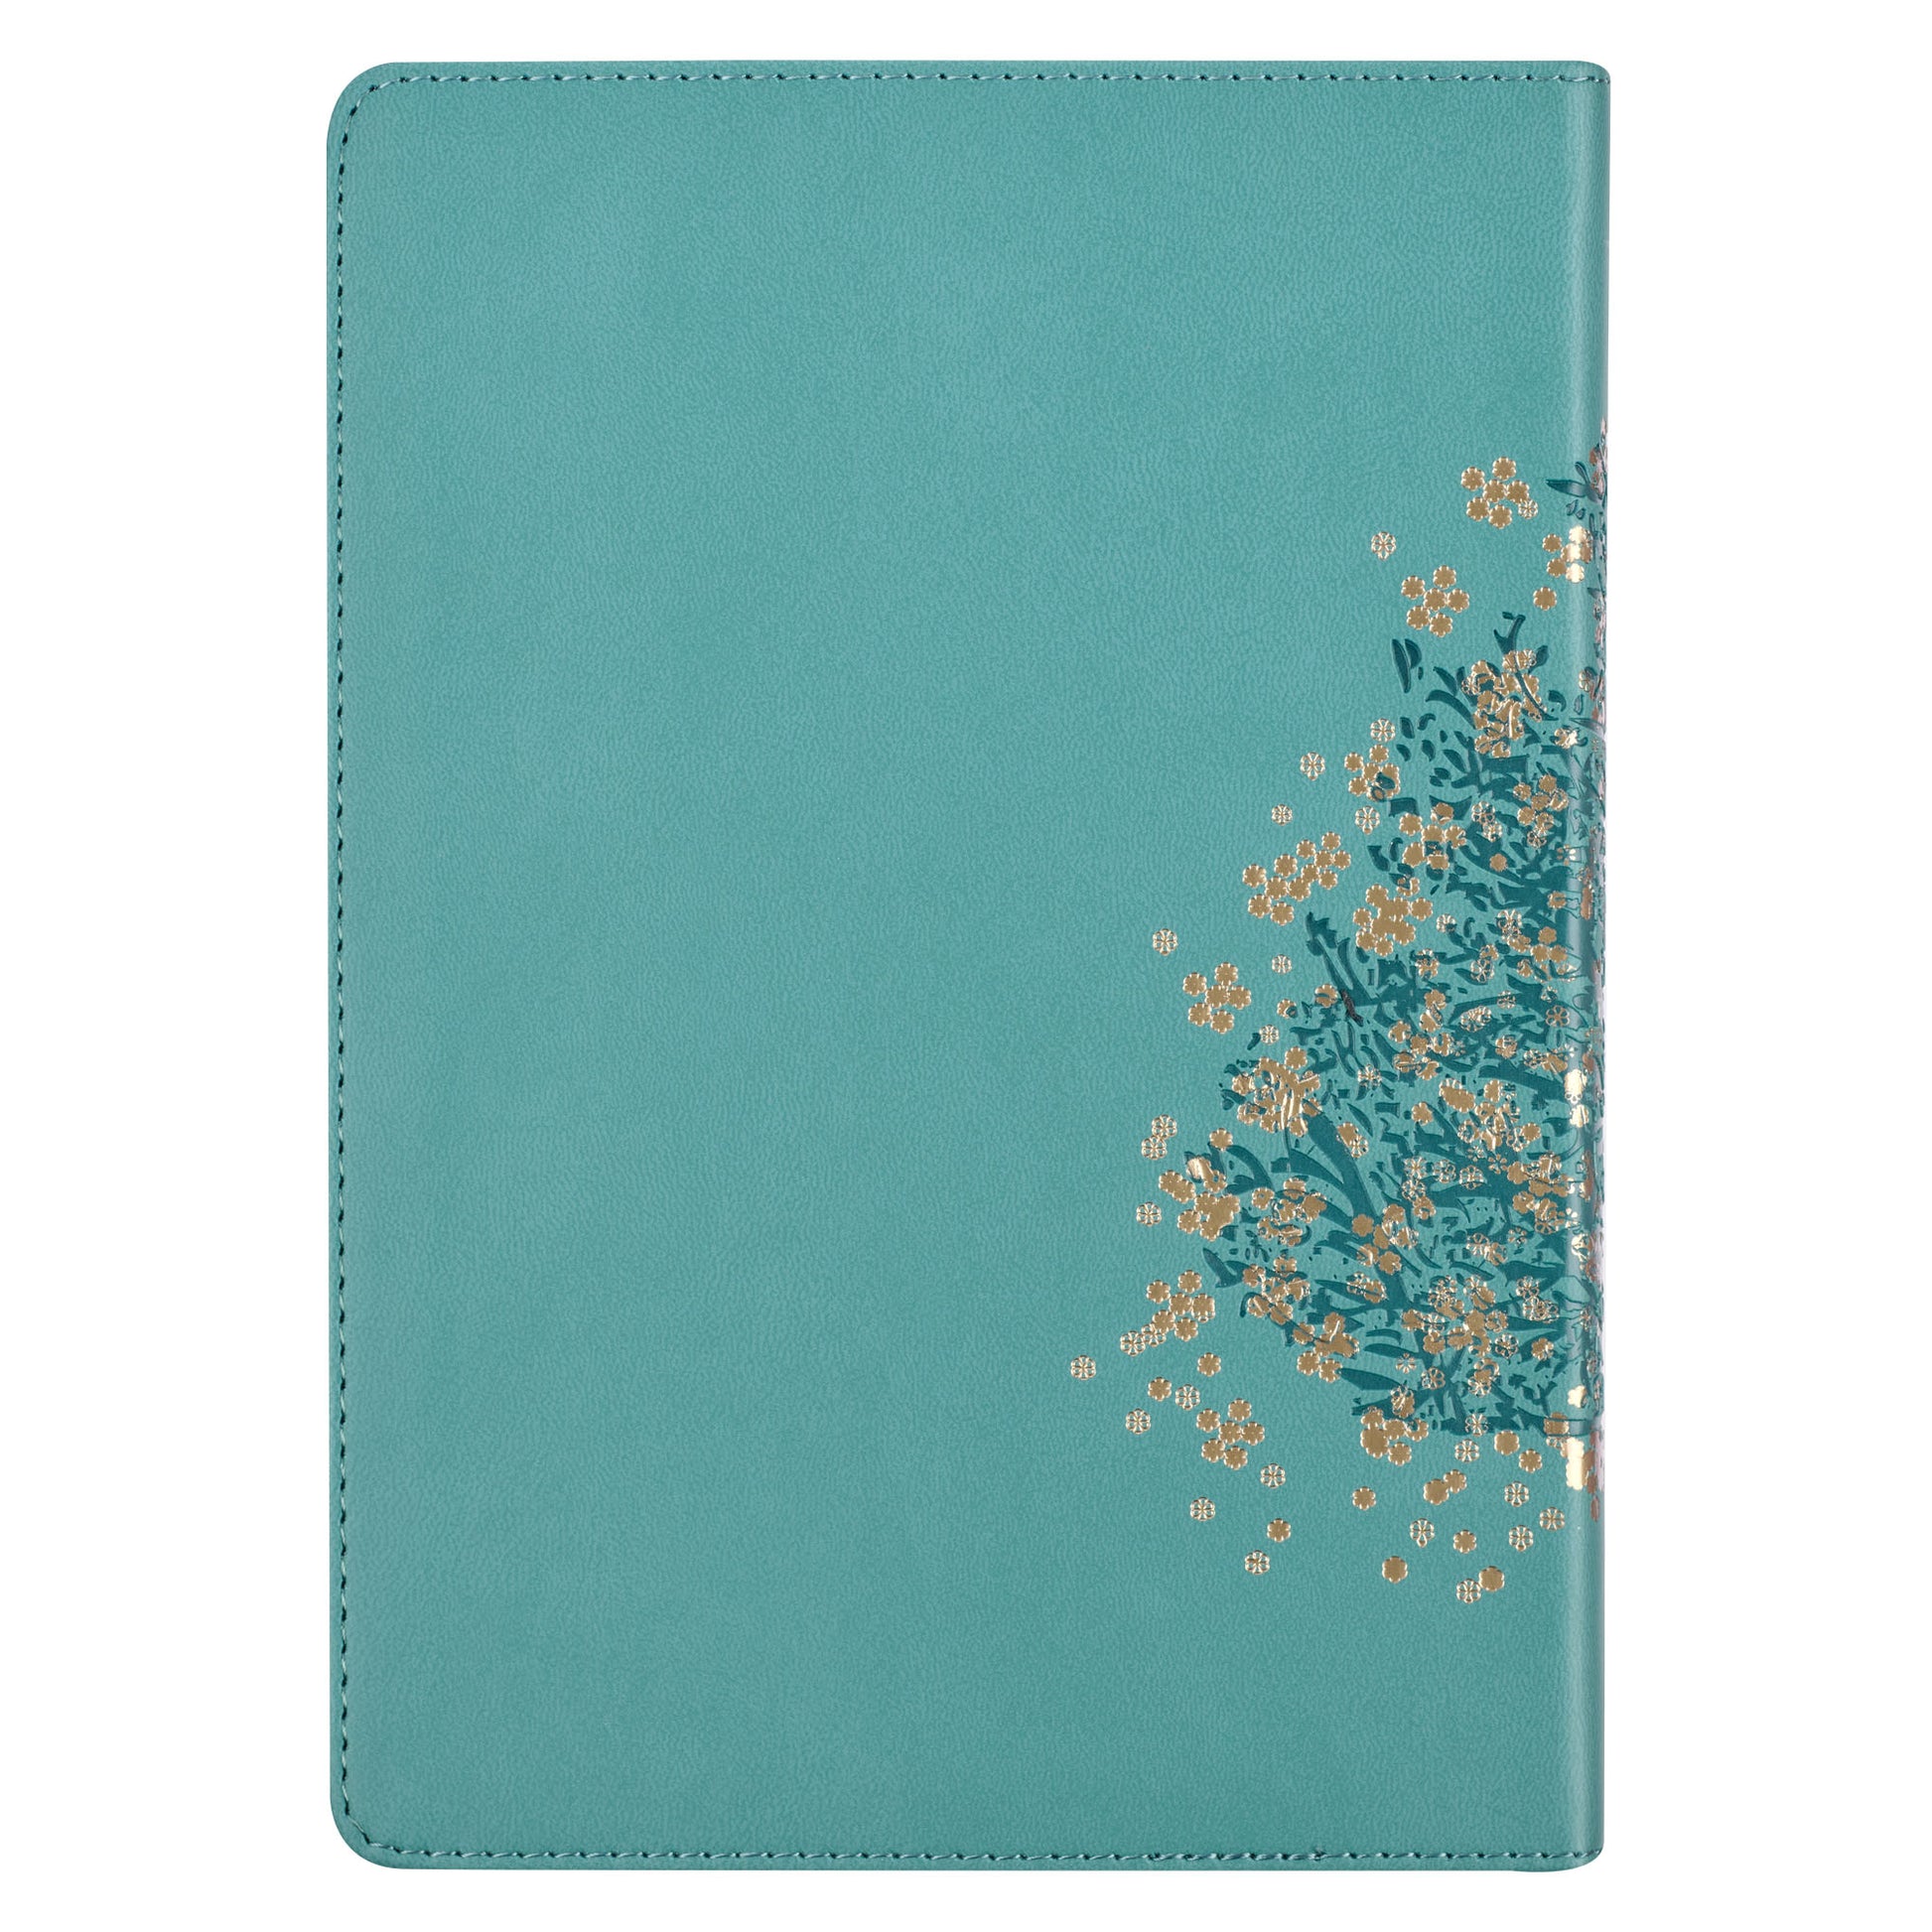 Be Still & Know Teal Faux Leather Classic Journal - Psalm 46:10 - The Christian Gift Company